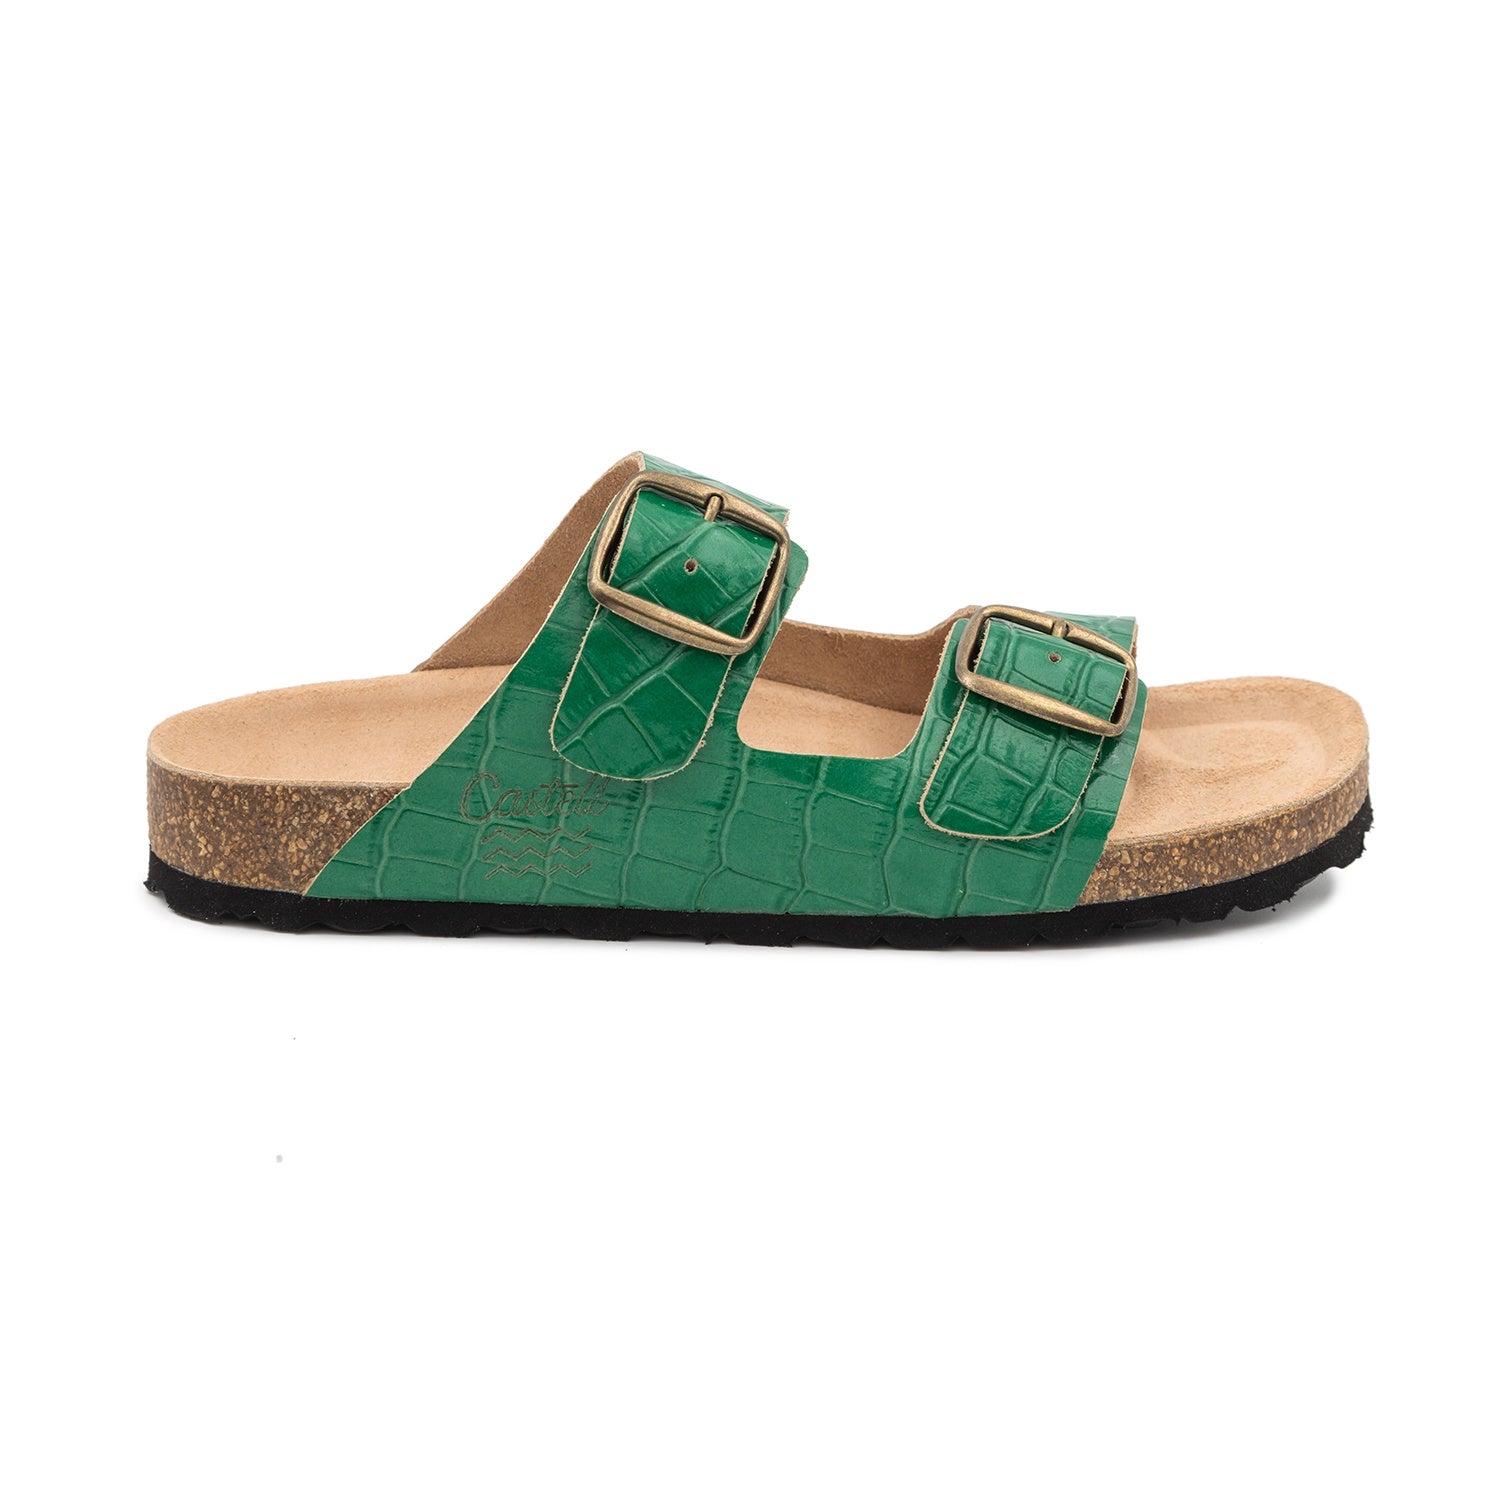 Plain Leather Sandal With Open Toe For Women - 1727 M Greco Tarvos